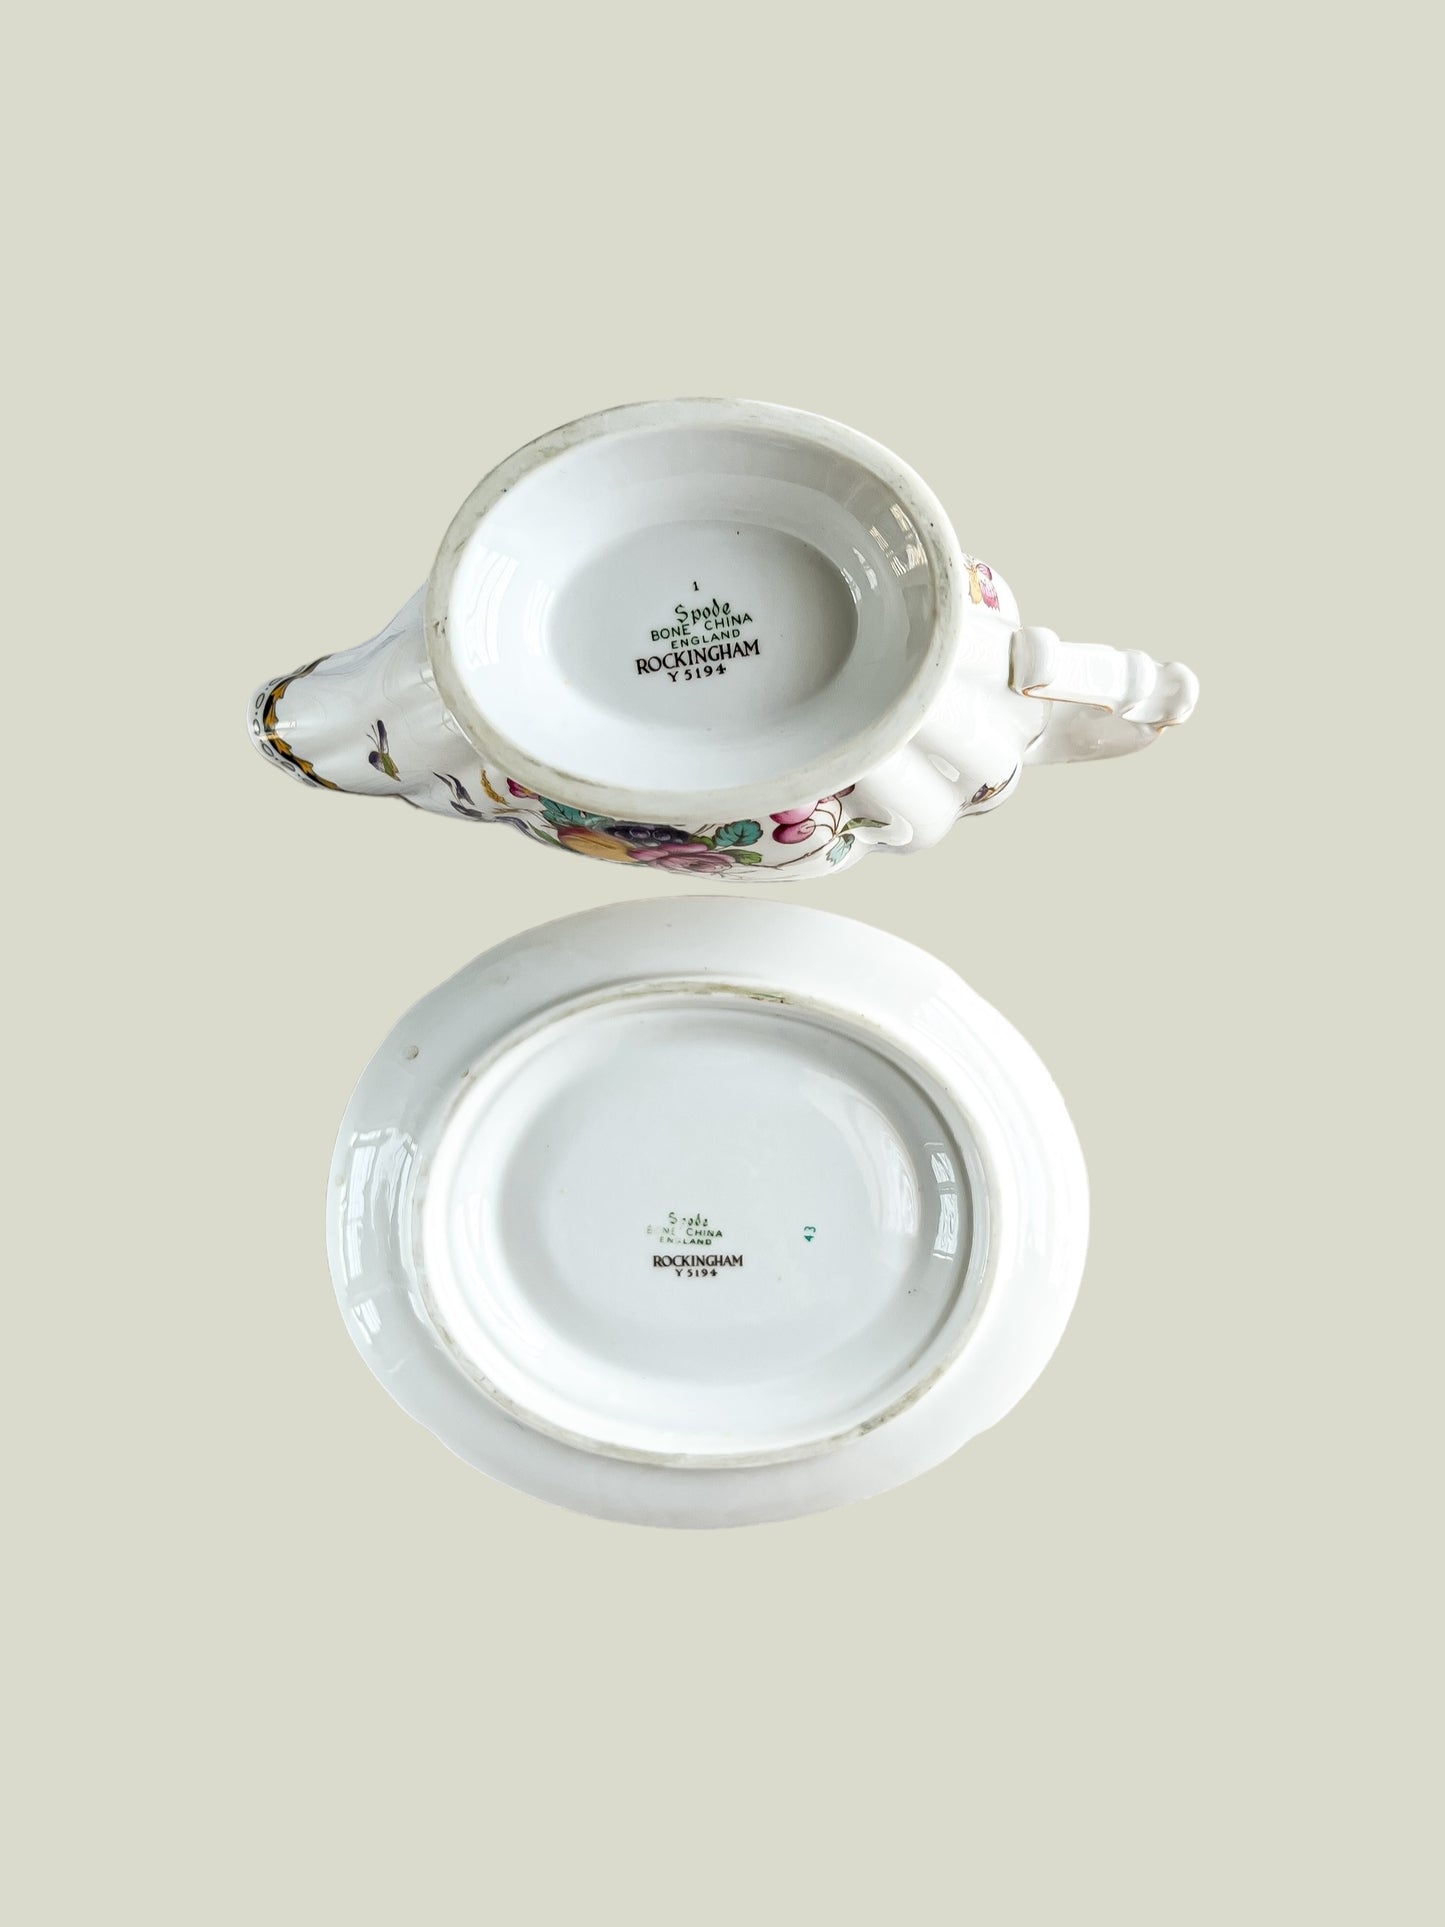 Spode Gravy Boat with Underplate - ‘Rockingham’ Collection (Modern Version) - SOSC Home